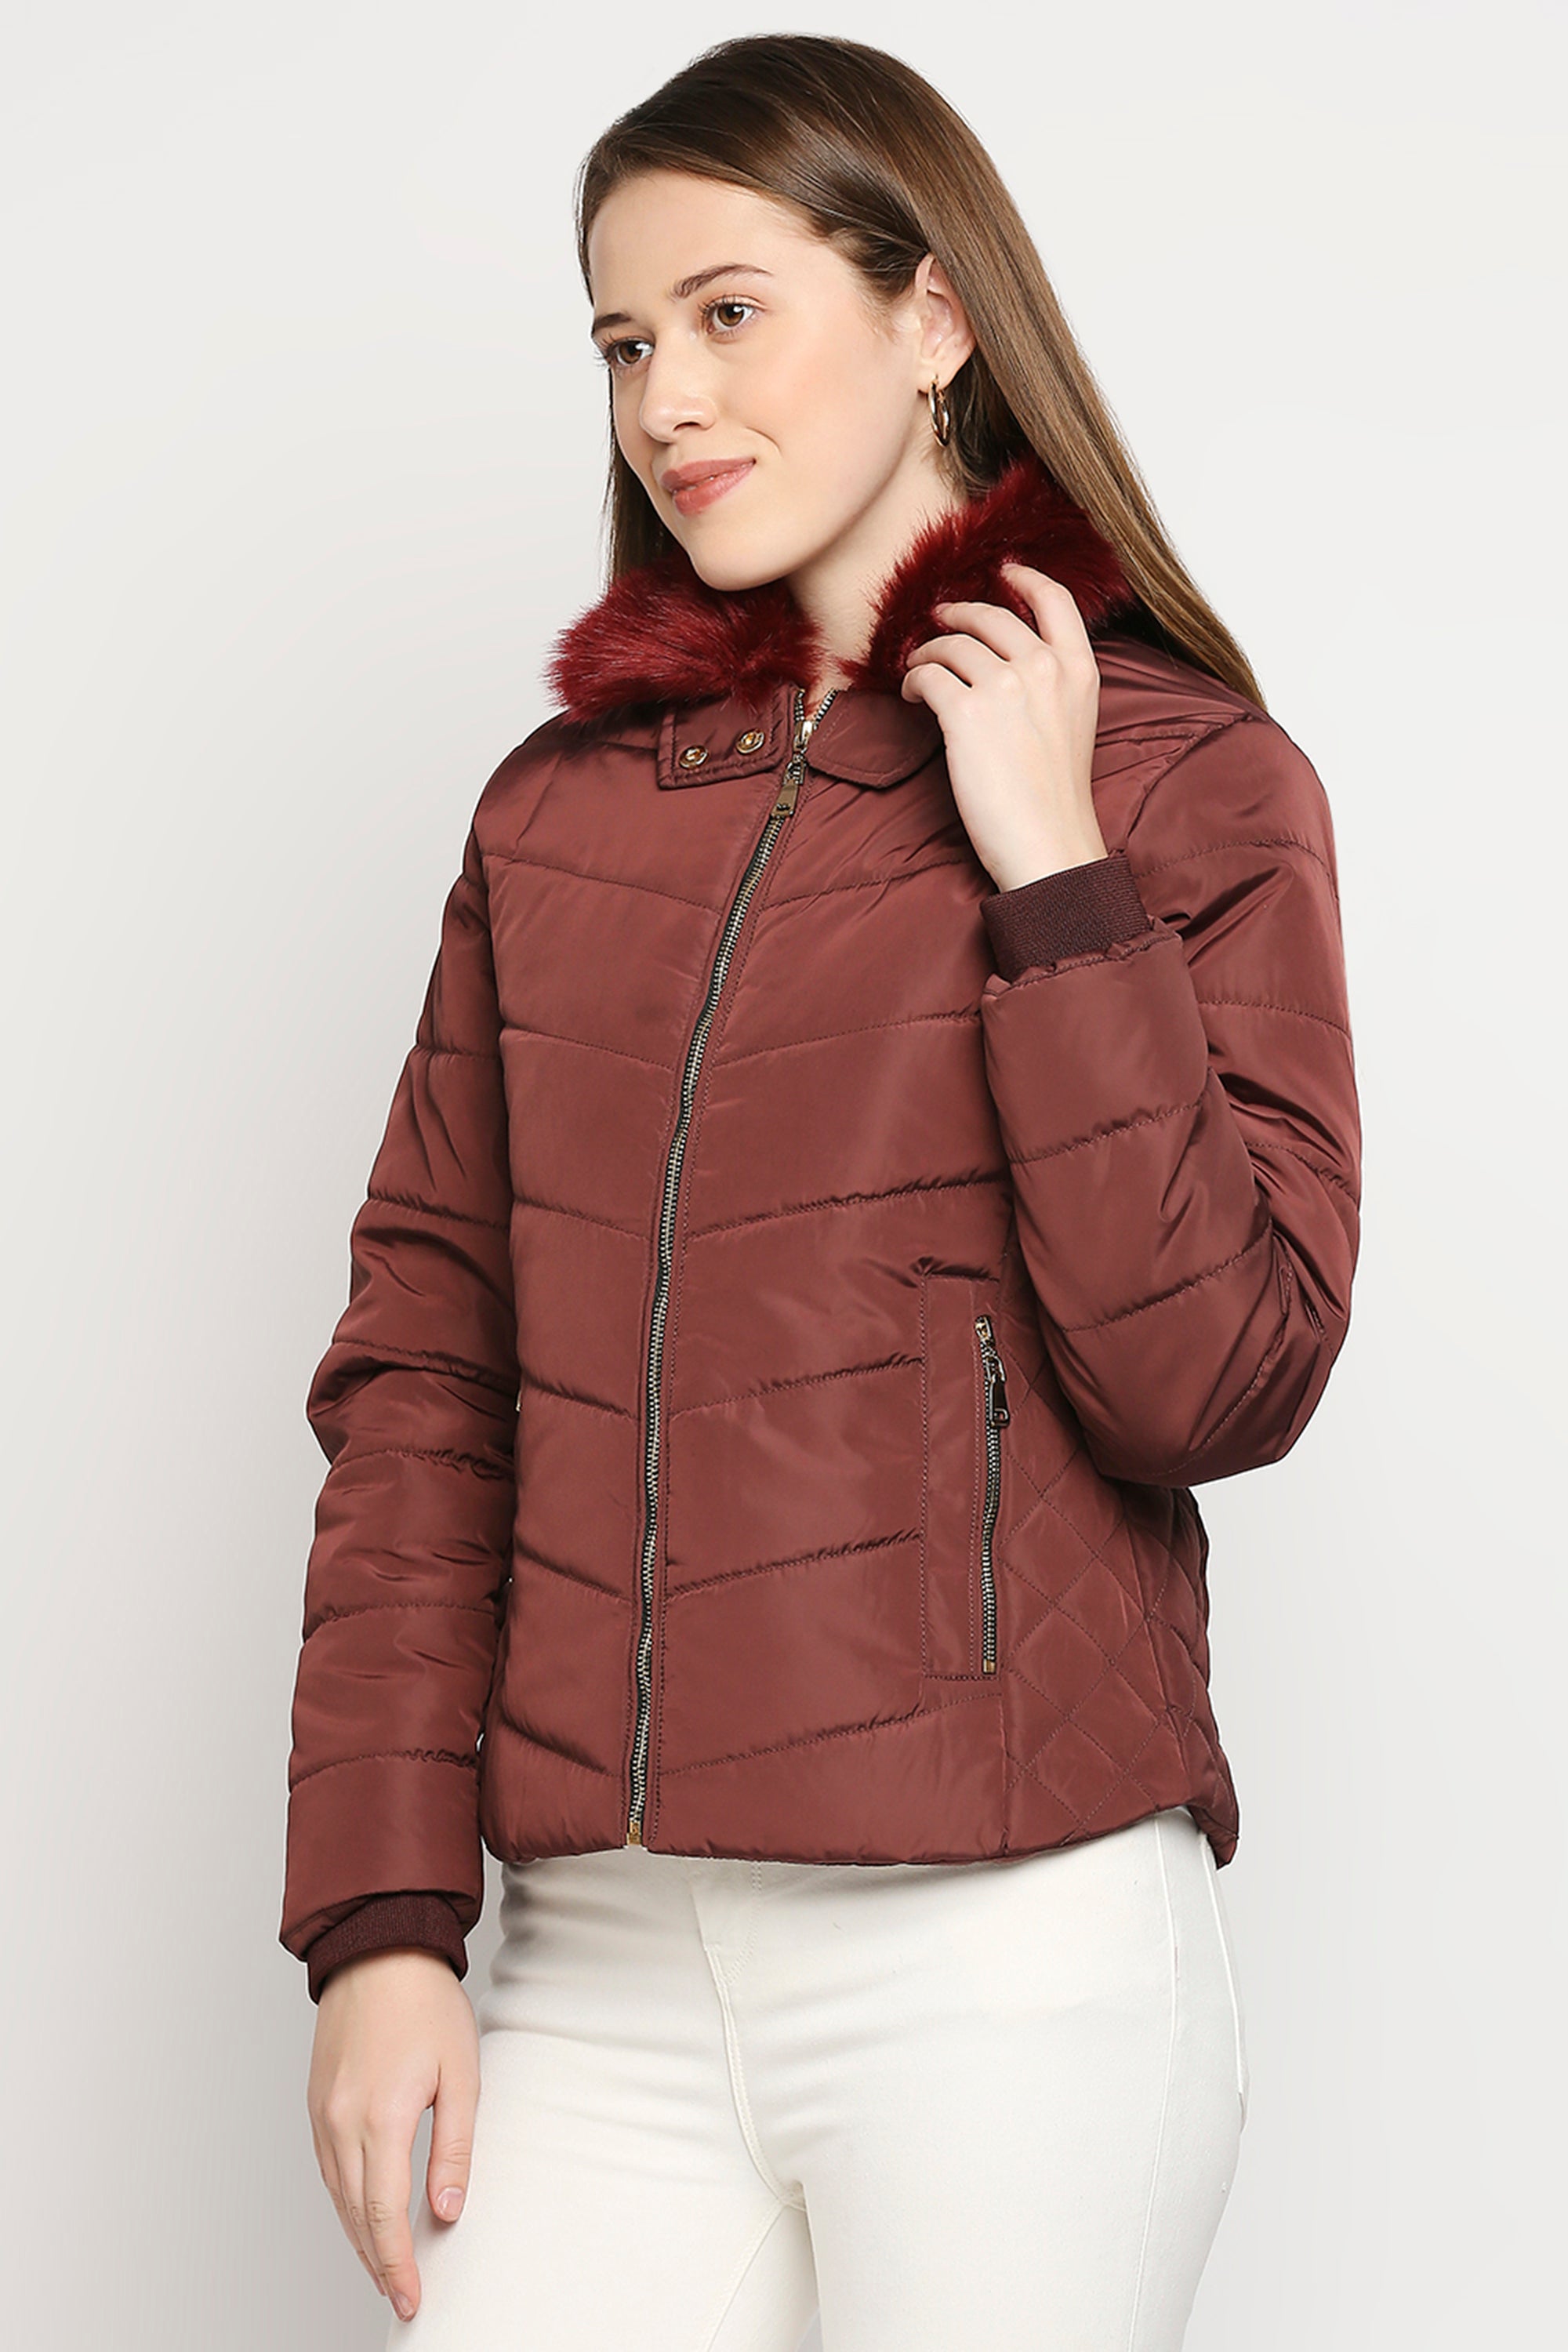 Wine Brown Fur Collar Mid-Length Puffer Jacket With Zip Details